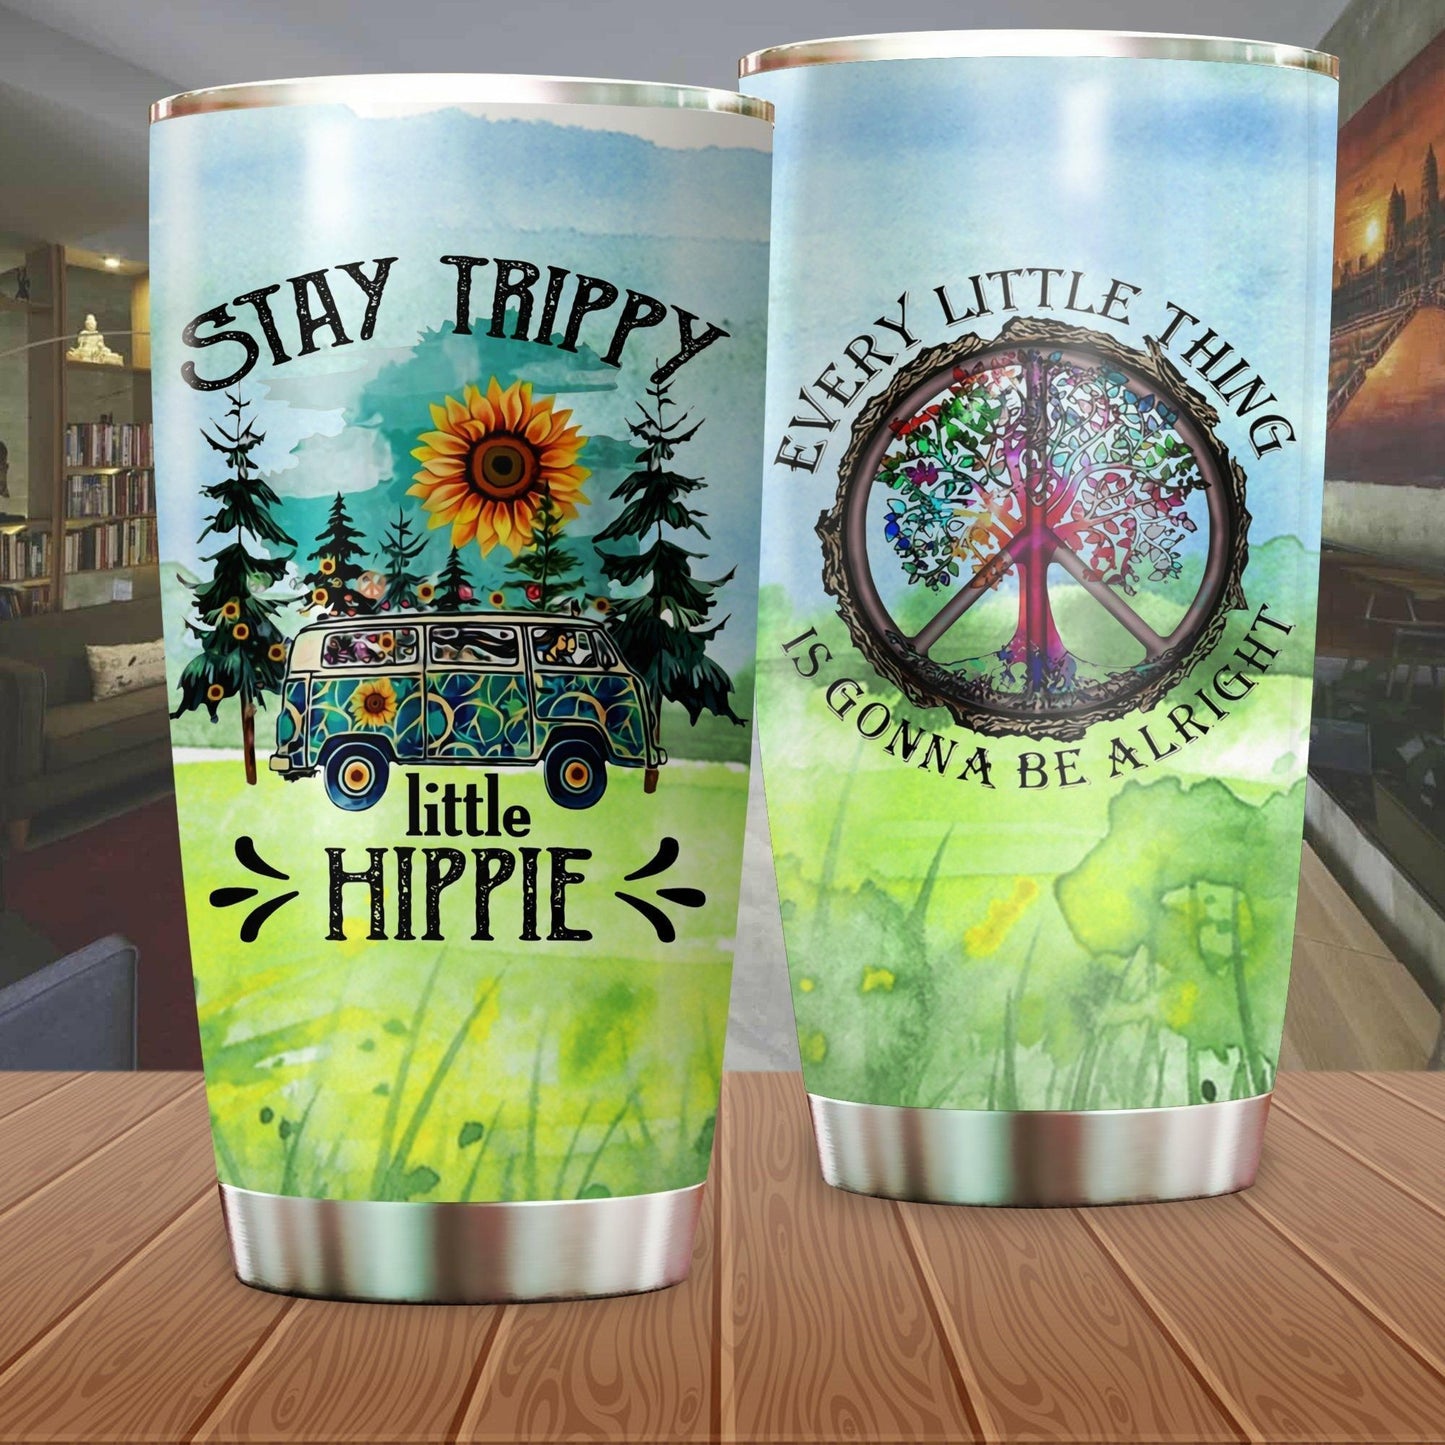  Hippie Tumbler 20 Oz Stay Trippy Little Hippie Everything Is Gonna Be Alright Peace Sign Tumbler Cup 20 Oz Travel Mug